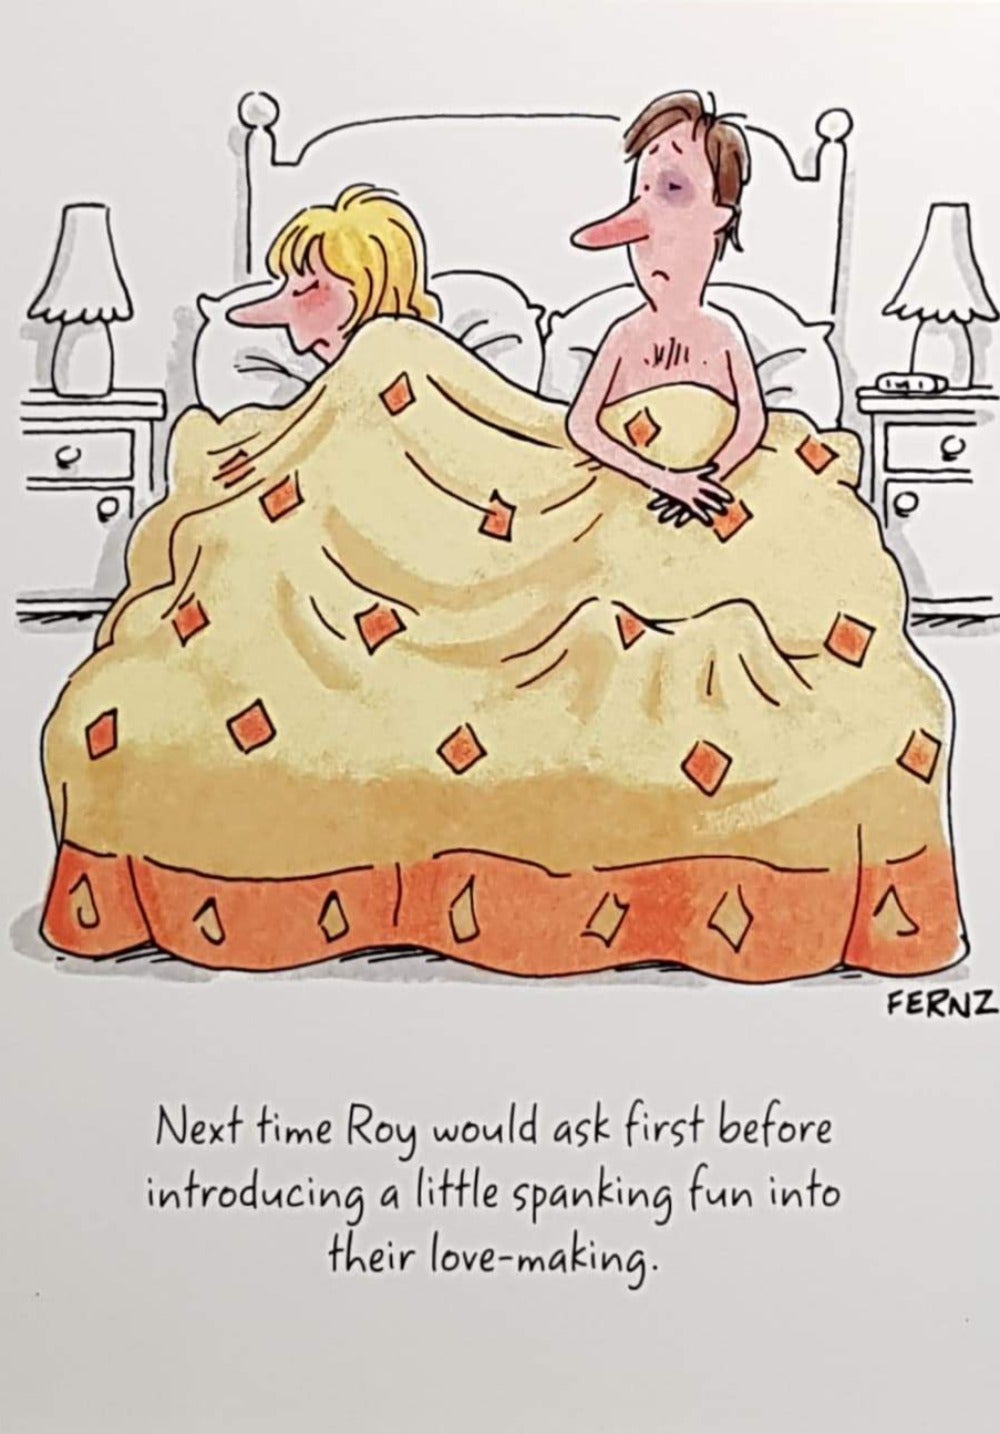 Birthday Card - Humour / Couple Lying in Bed